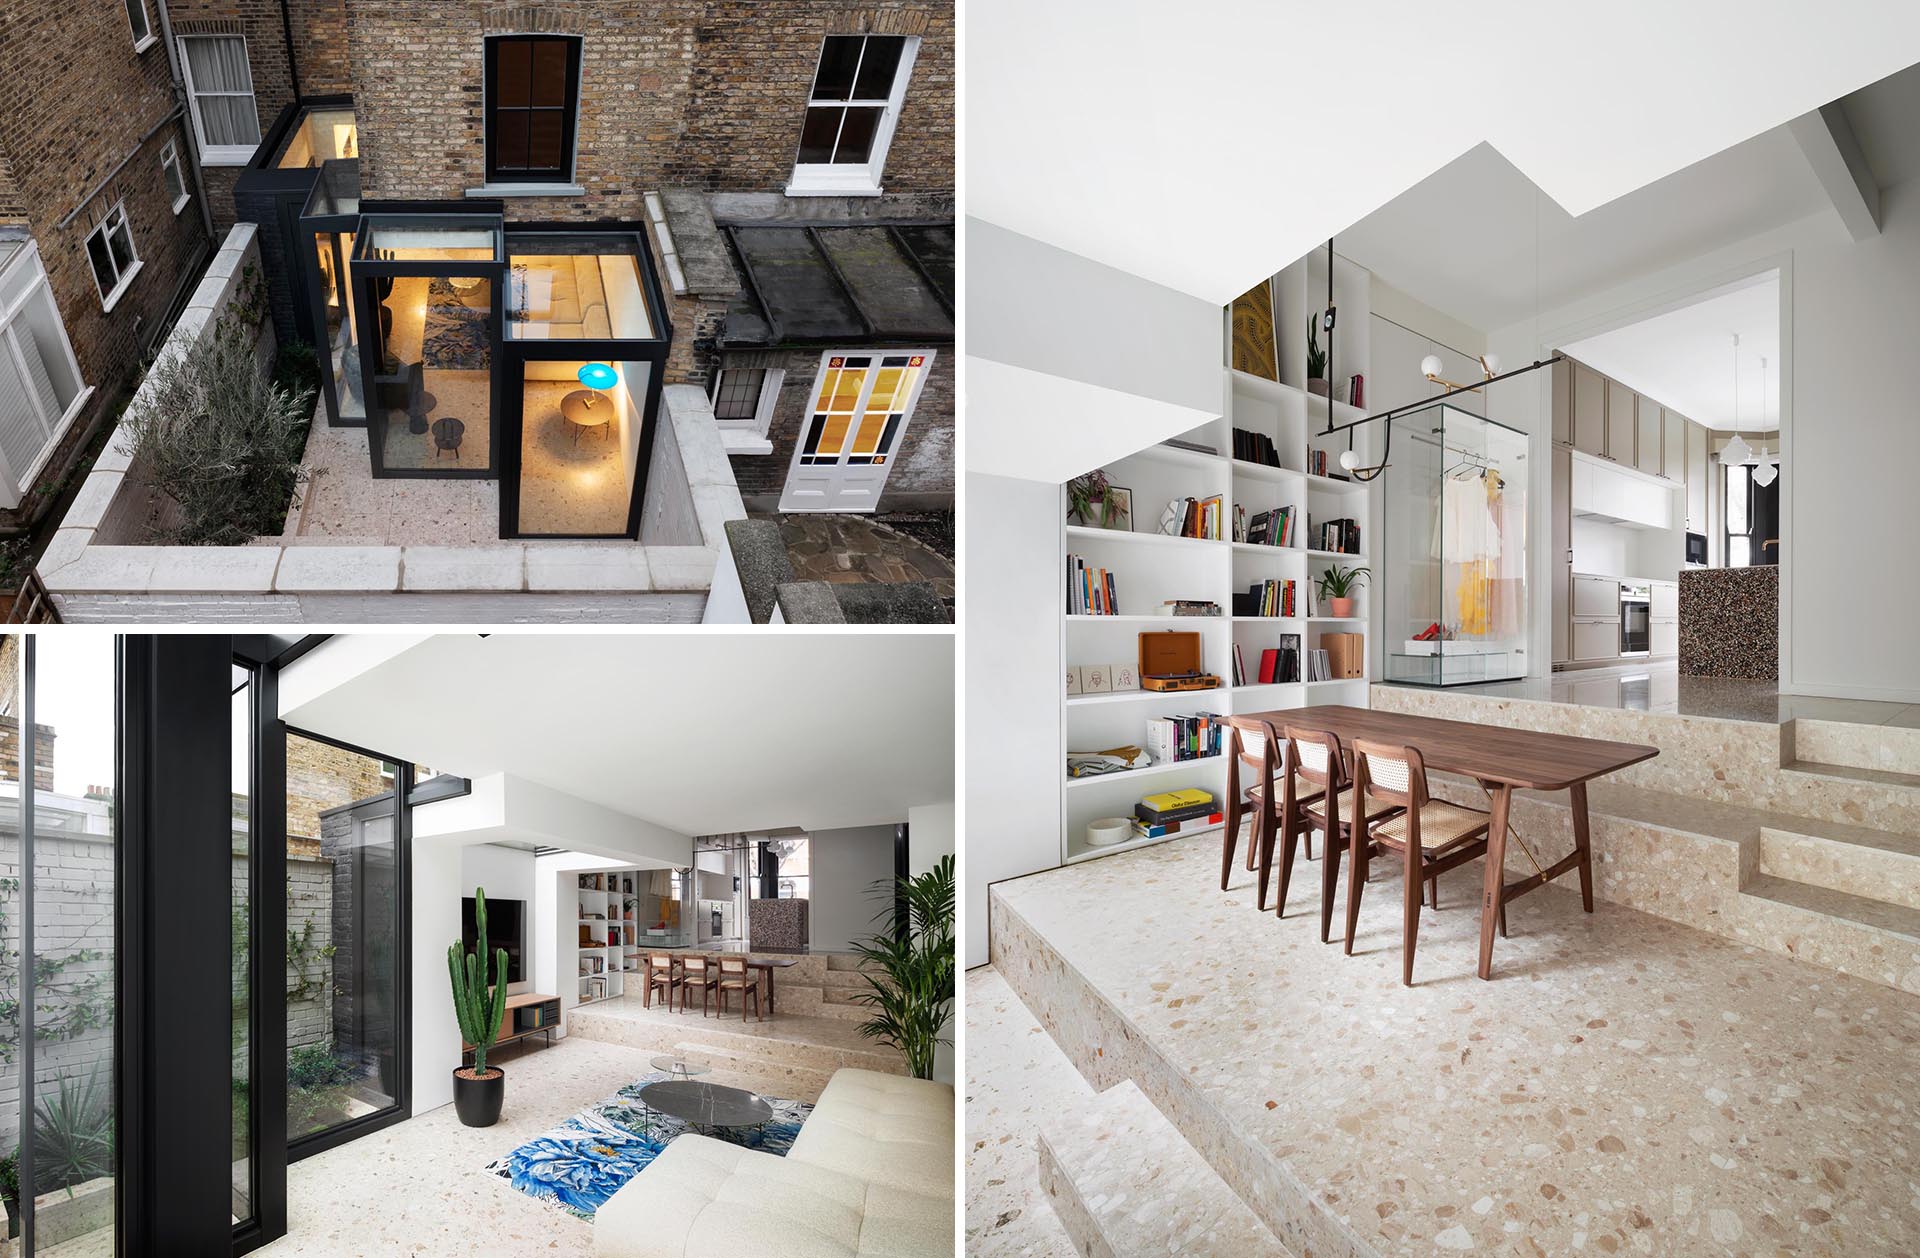 Bureau de Change Architects has completed a modern rear extension and the refurbishment of a Victorian terraced house in South London, England.